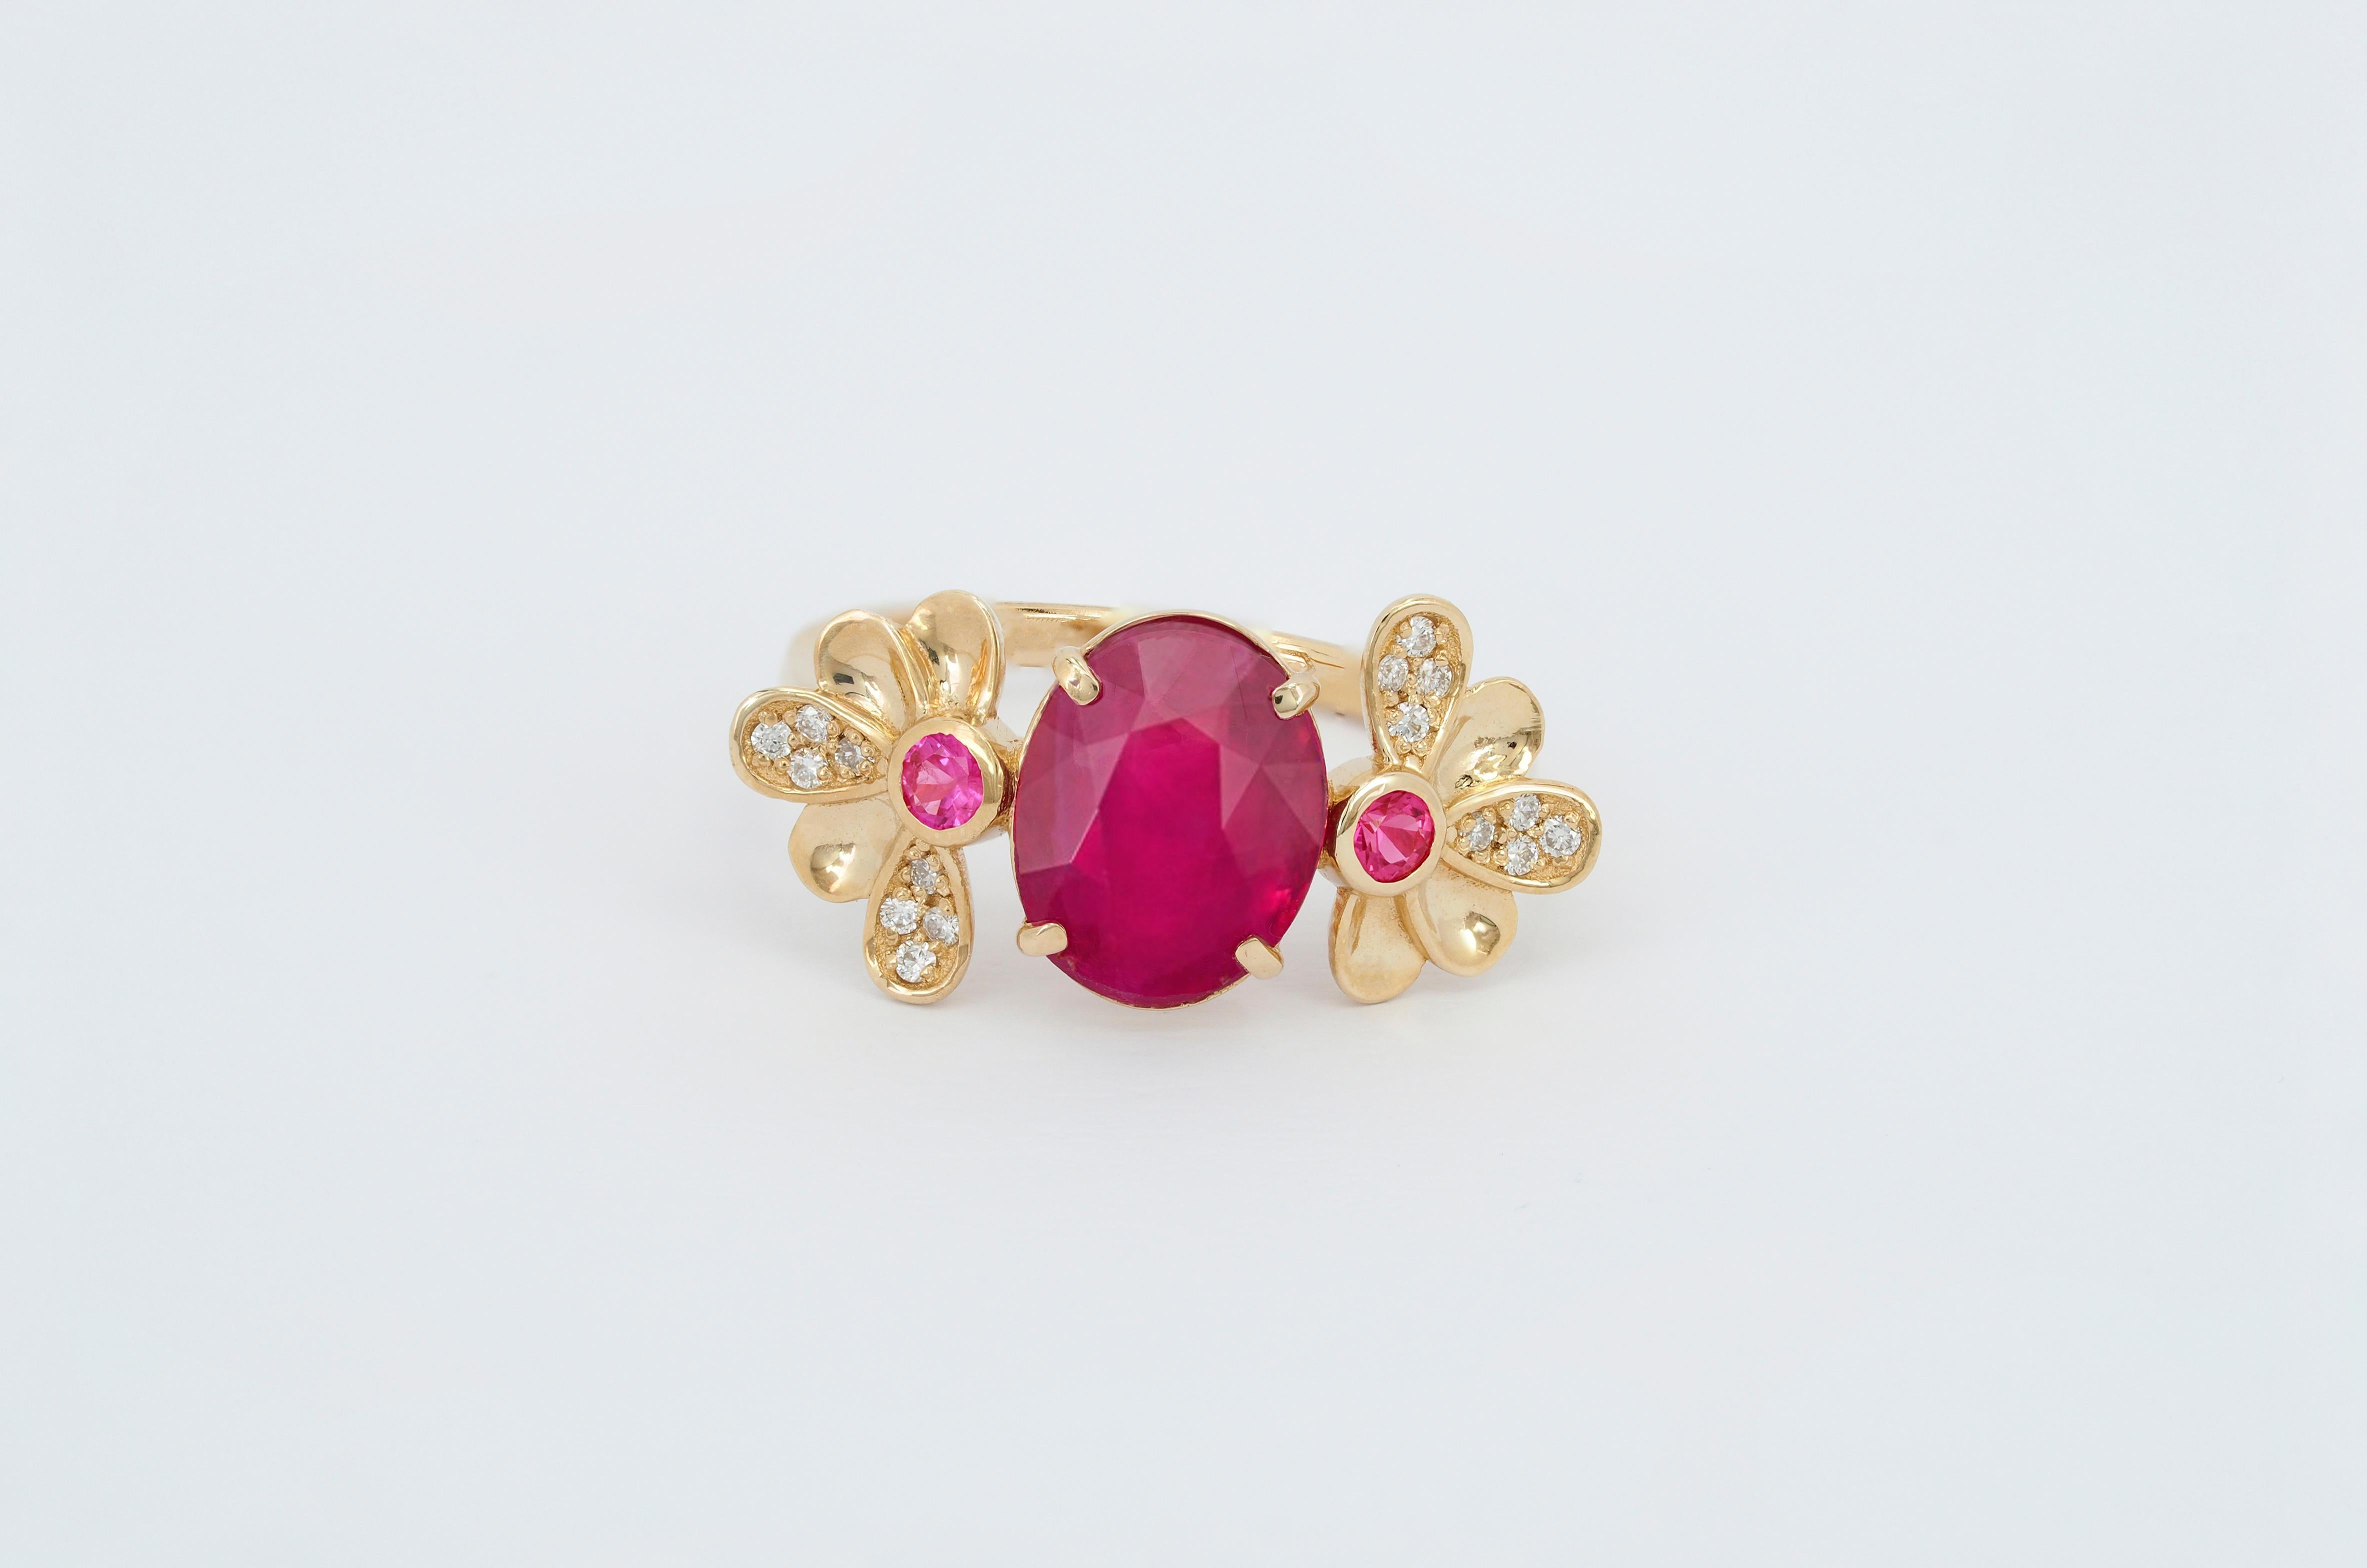 For Sale:  14 Karat Gold Ring with Ruby and Diamonds. Flower design ruby ring 5